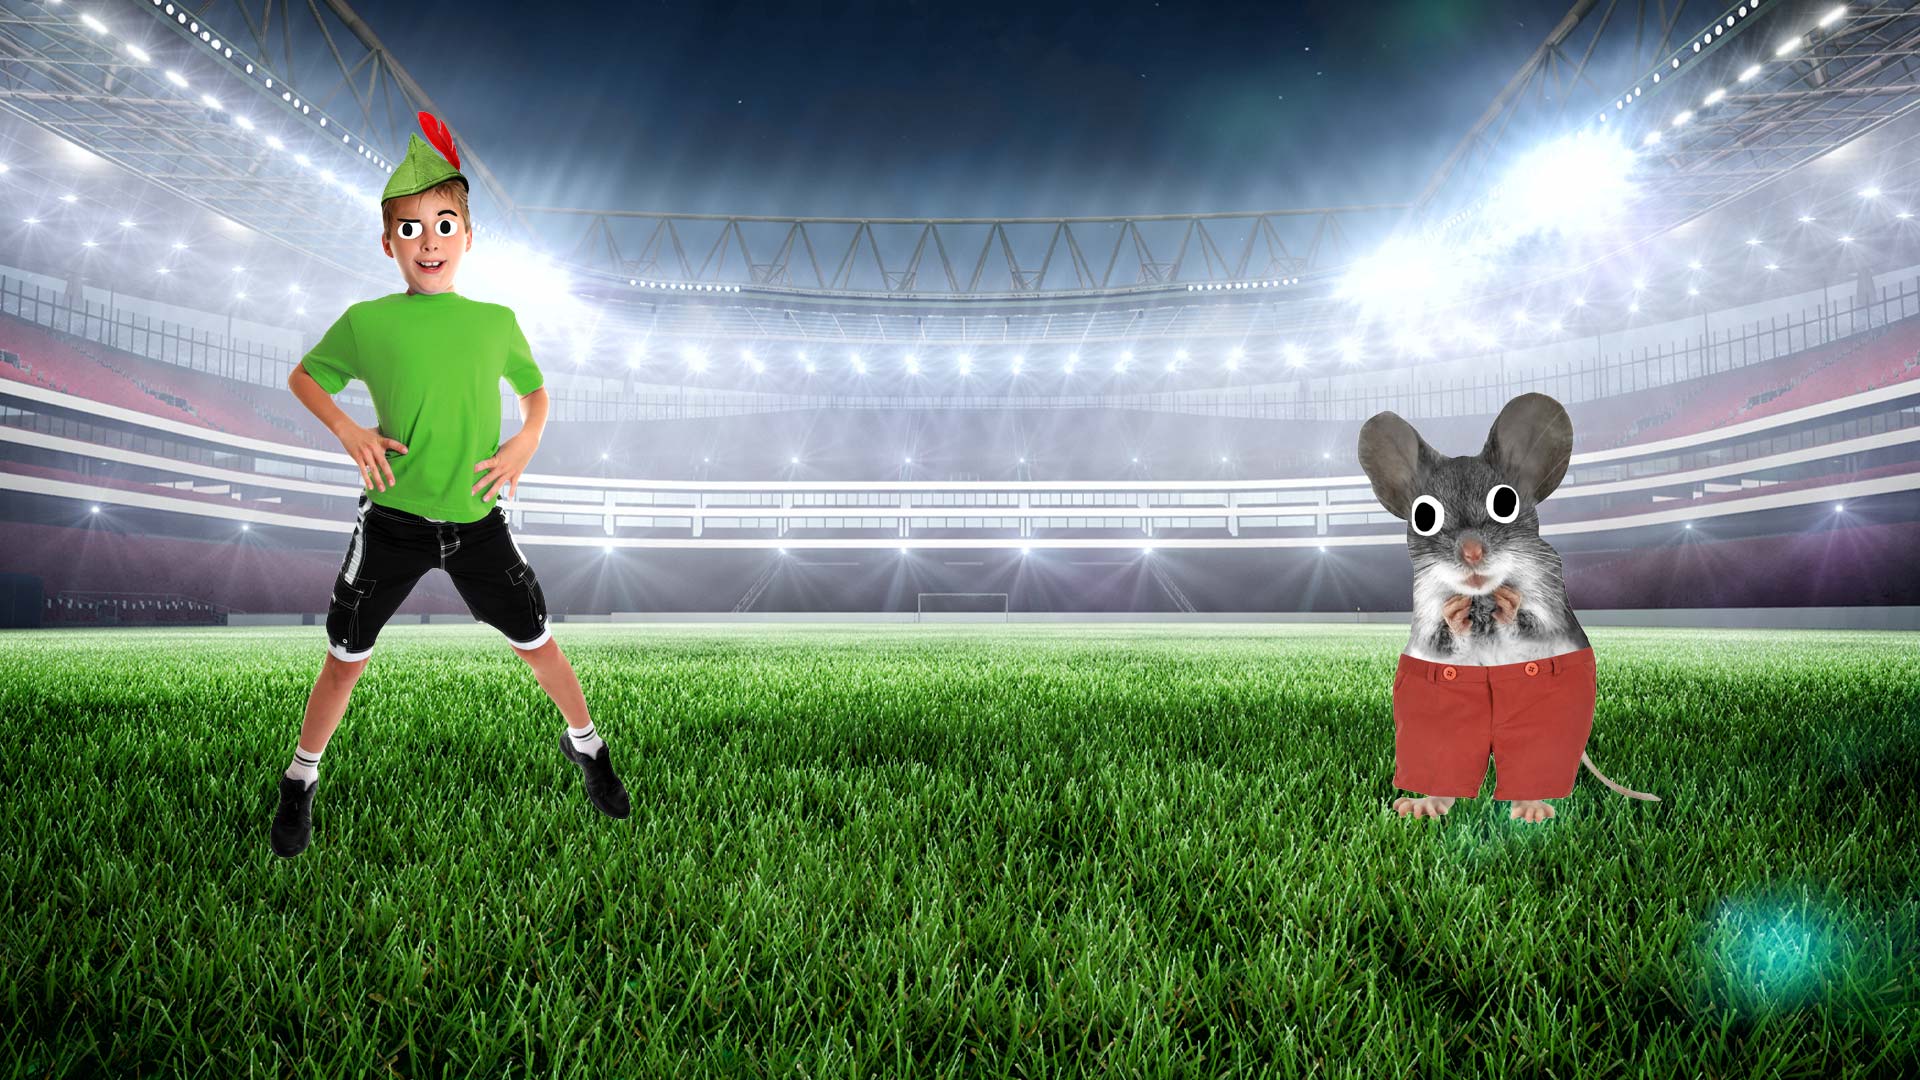 Peter Pan and Mickey Mouse in a football stadium